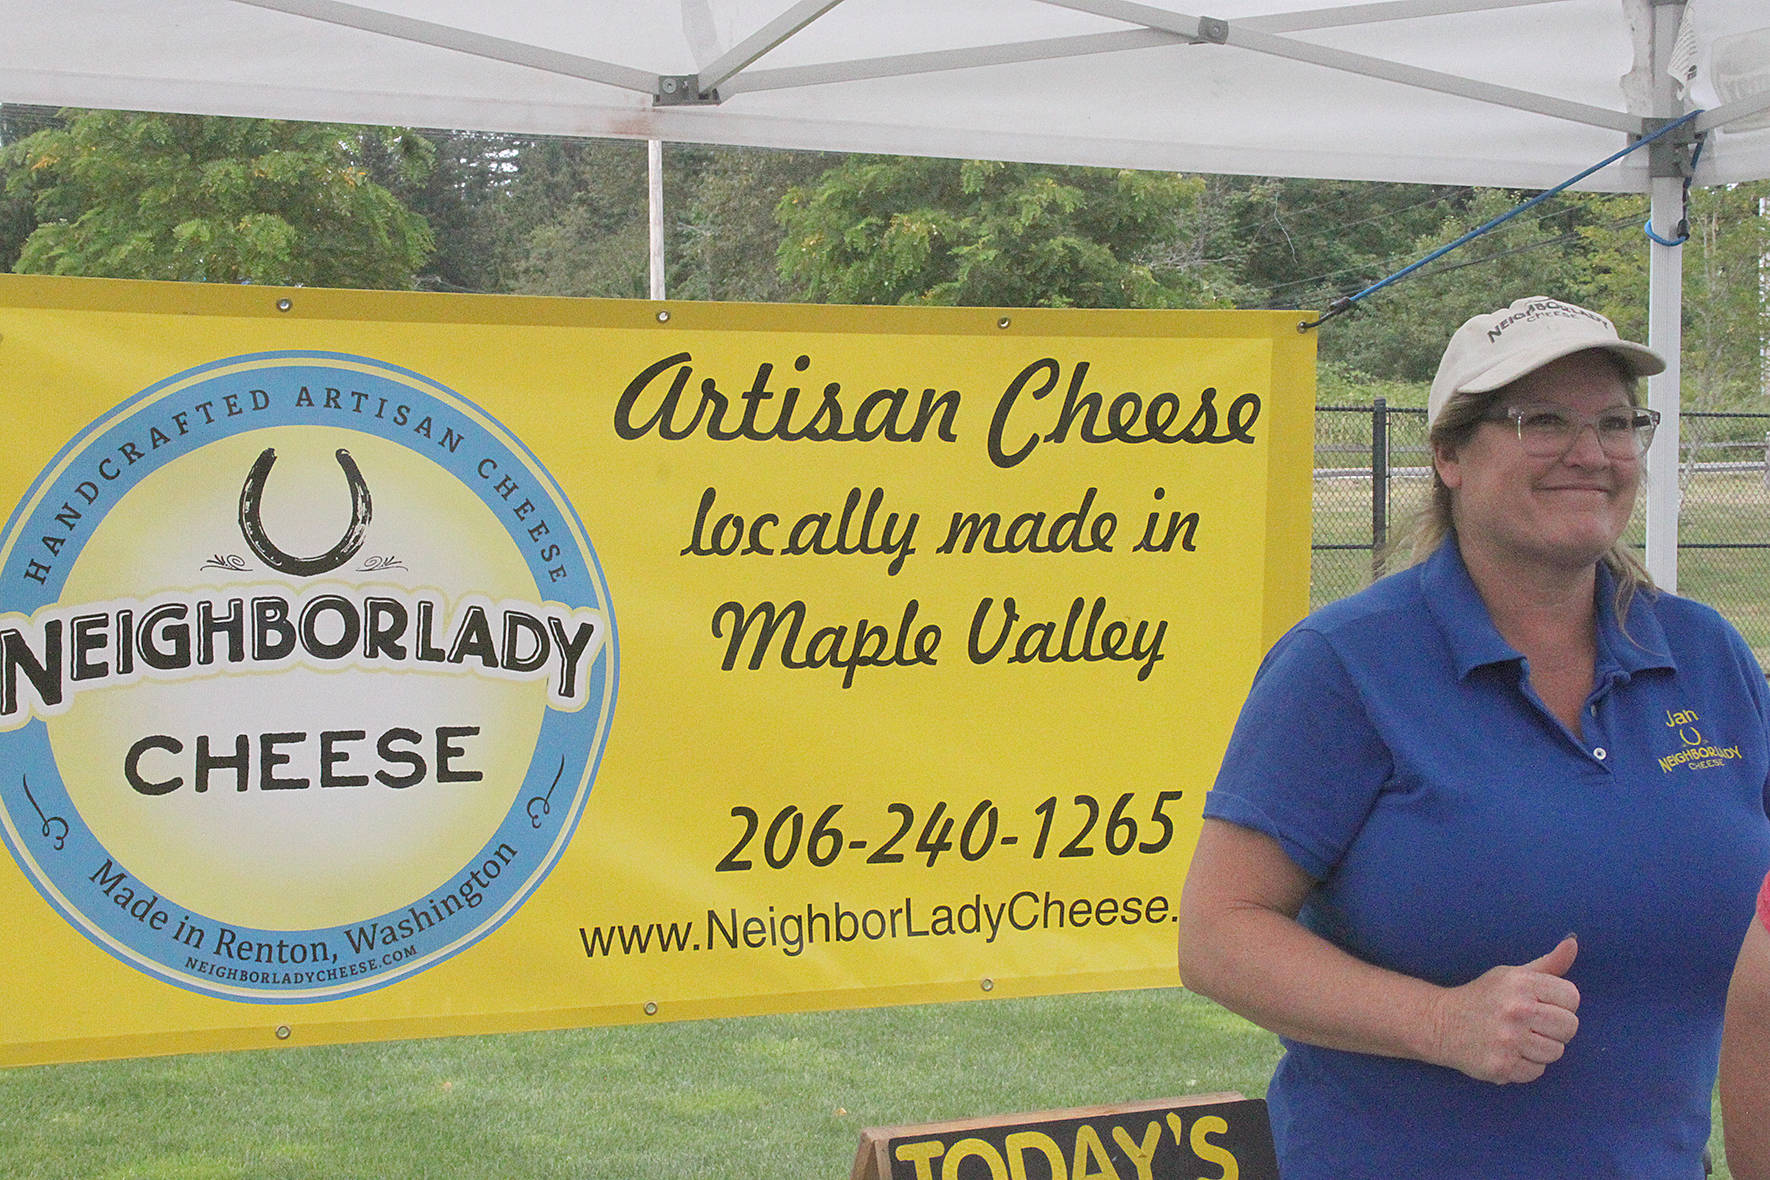 Maple Valley’s artisan cheese vendor, Neighborlady Cheese, handed out samples of ghouda, pepper jack and more at the 2019 Covington Sausage and Cider Fest. Photo by Danielle Chastaine